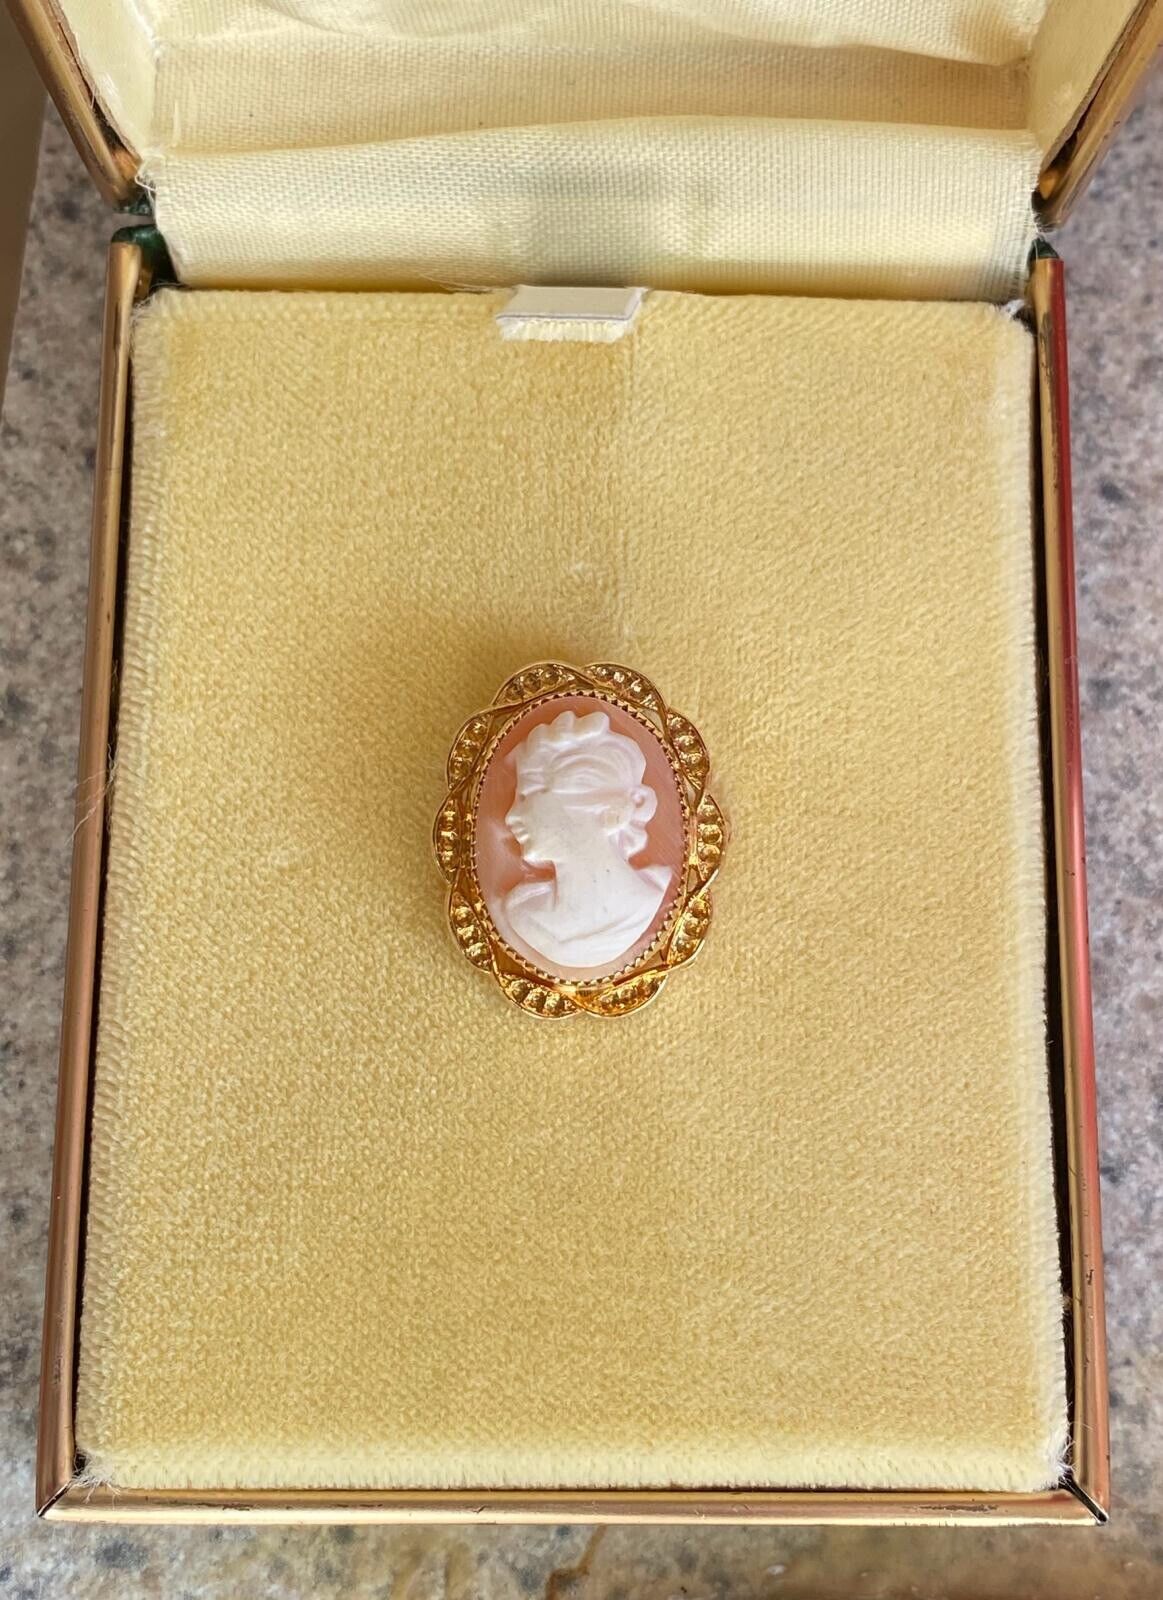 VINTAGE CATAMORE 1/20 12K GF CARVED SHELL CAMEO BROOCH PIN Gold Filled NEW! CATAMORE